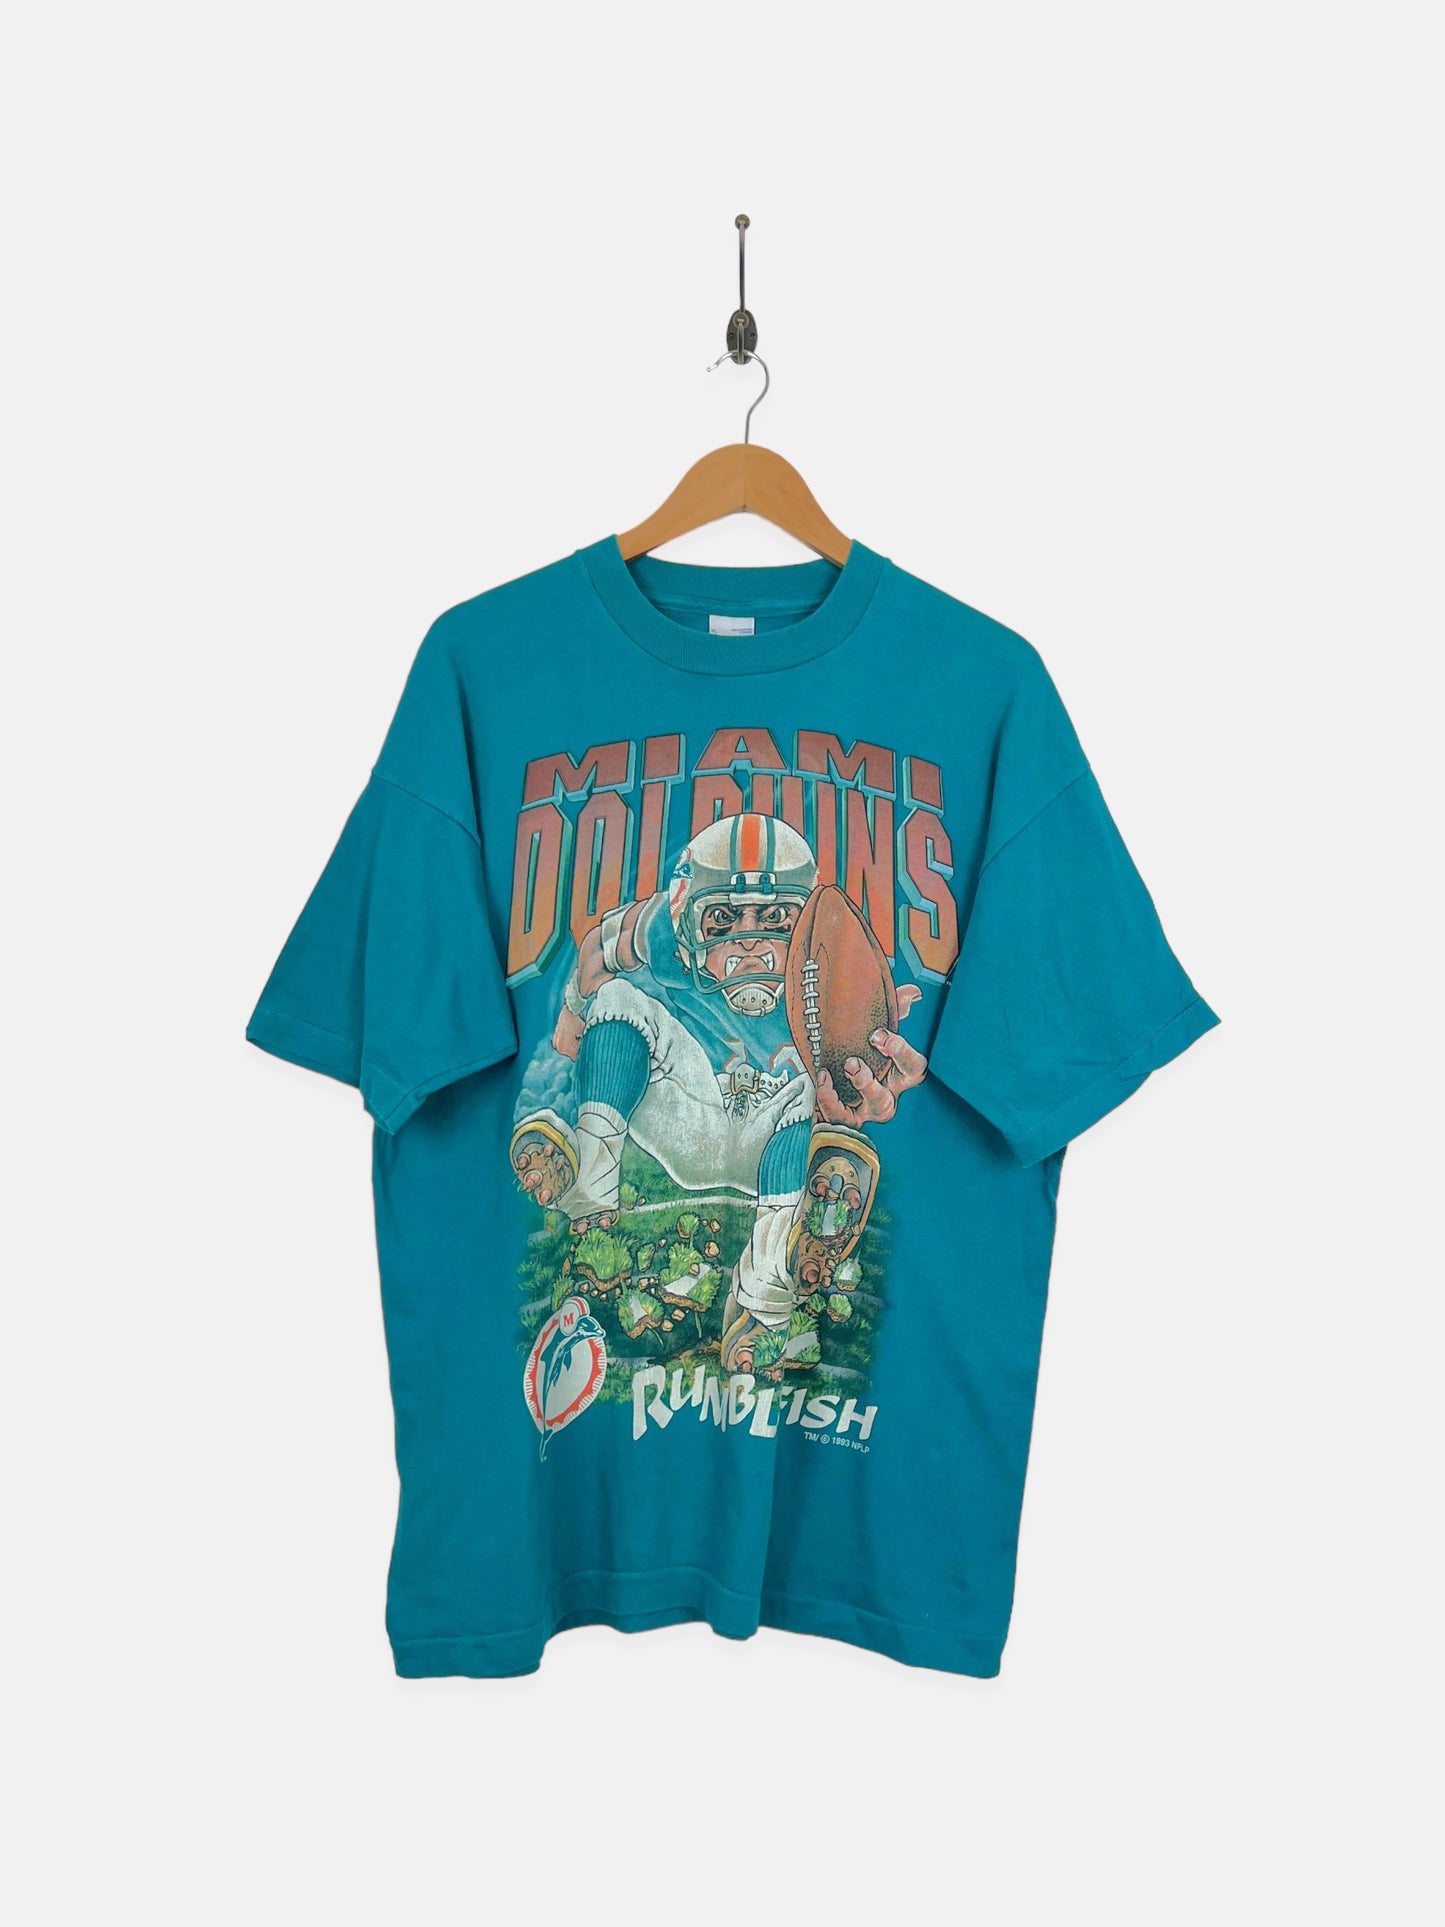 1993 Miami Dolphins NFL USA Made Vintage T-Shirt Size XL